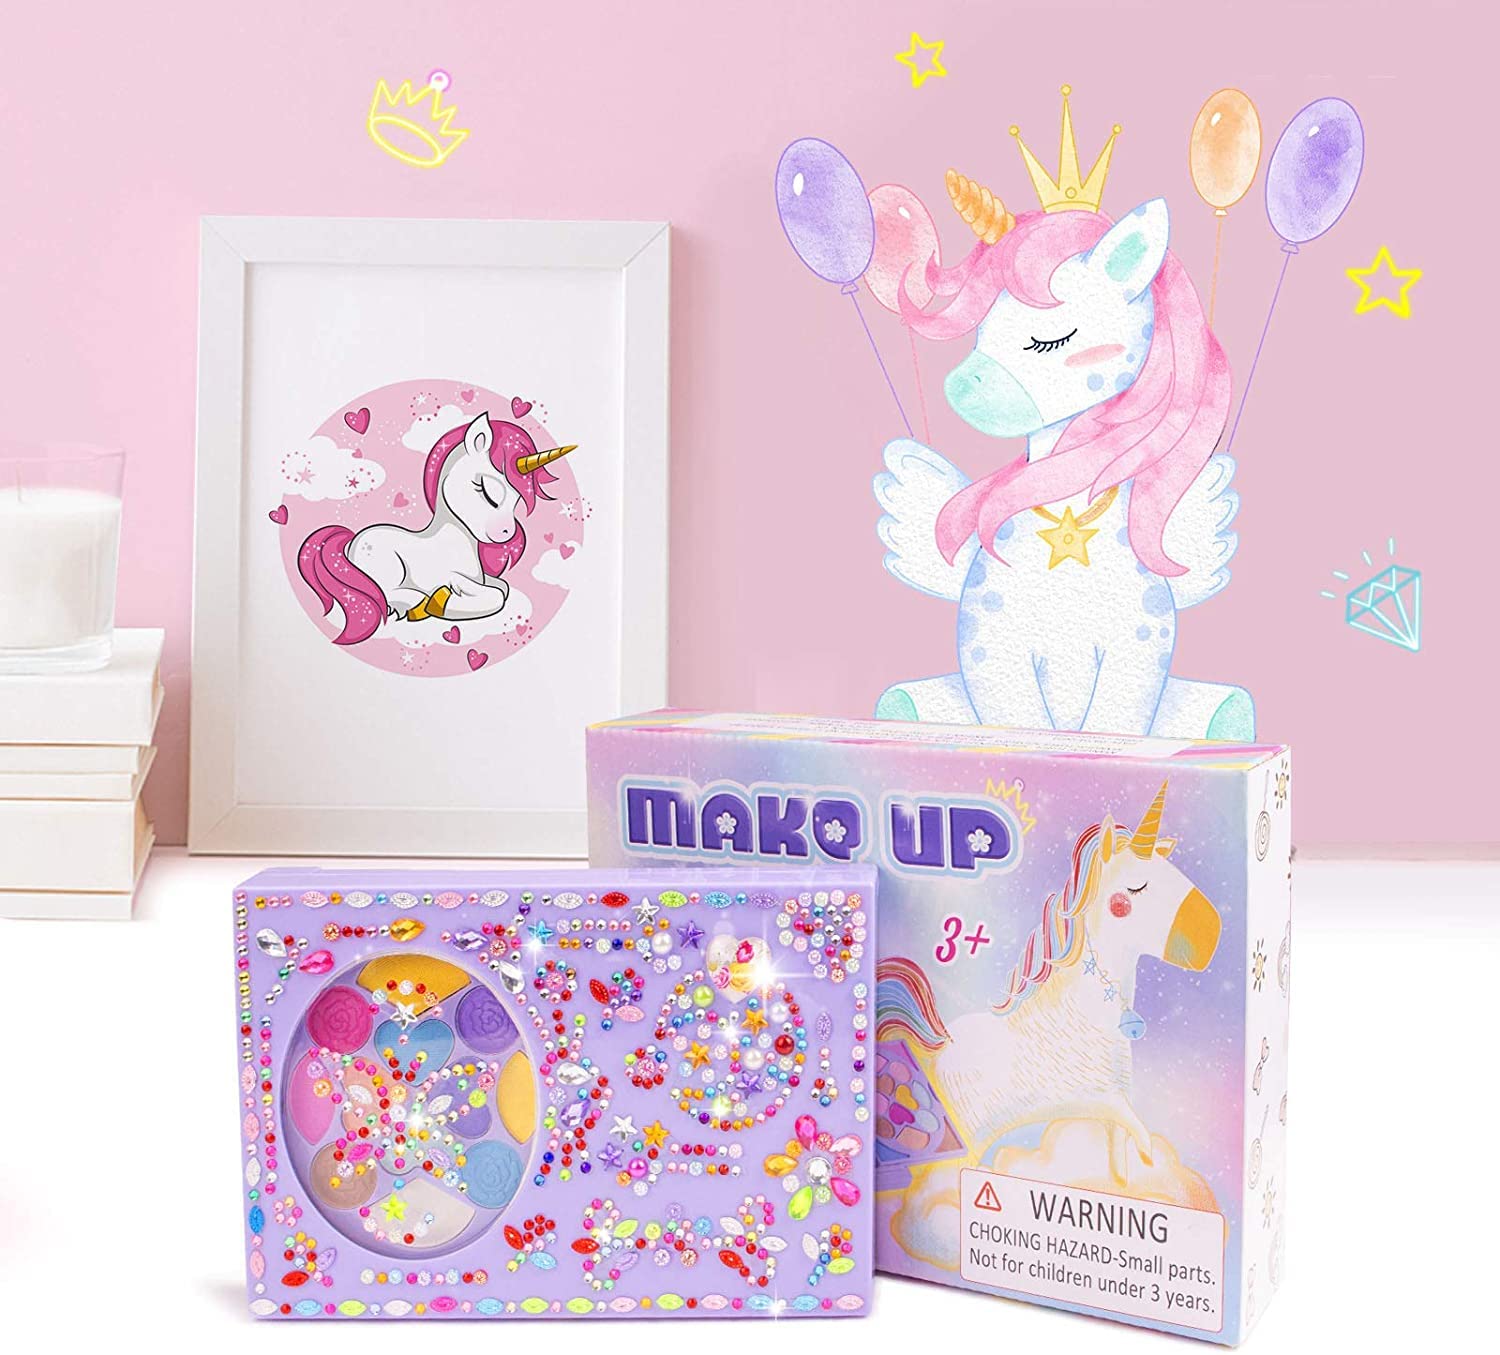 KIDCHEER Kids Makeup Kit for Girls Princess Real Washable Cosmetic Pretend Play Toys with Mirror - Non Toxic